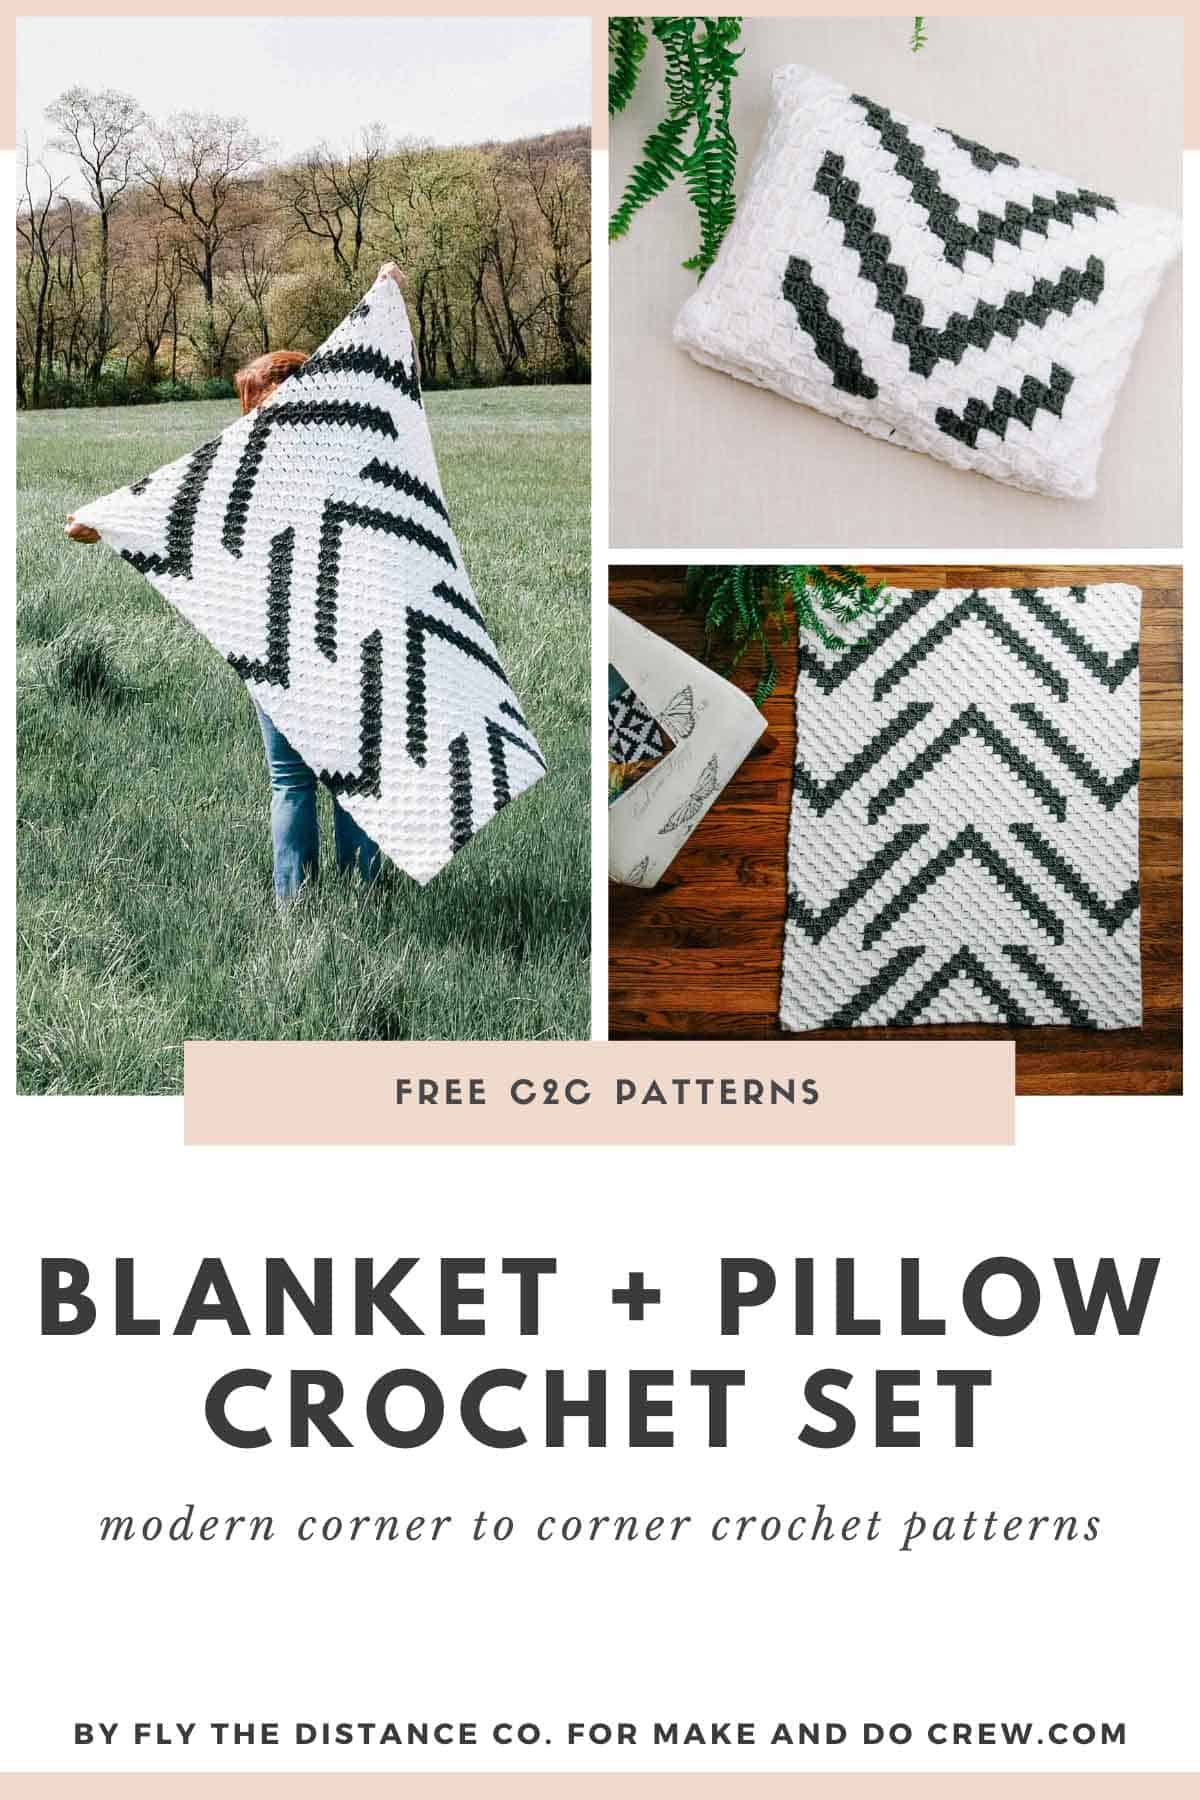 A grid of photos that shows a modern c2c crochet blanket and pillow that are a matching set.